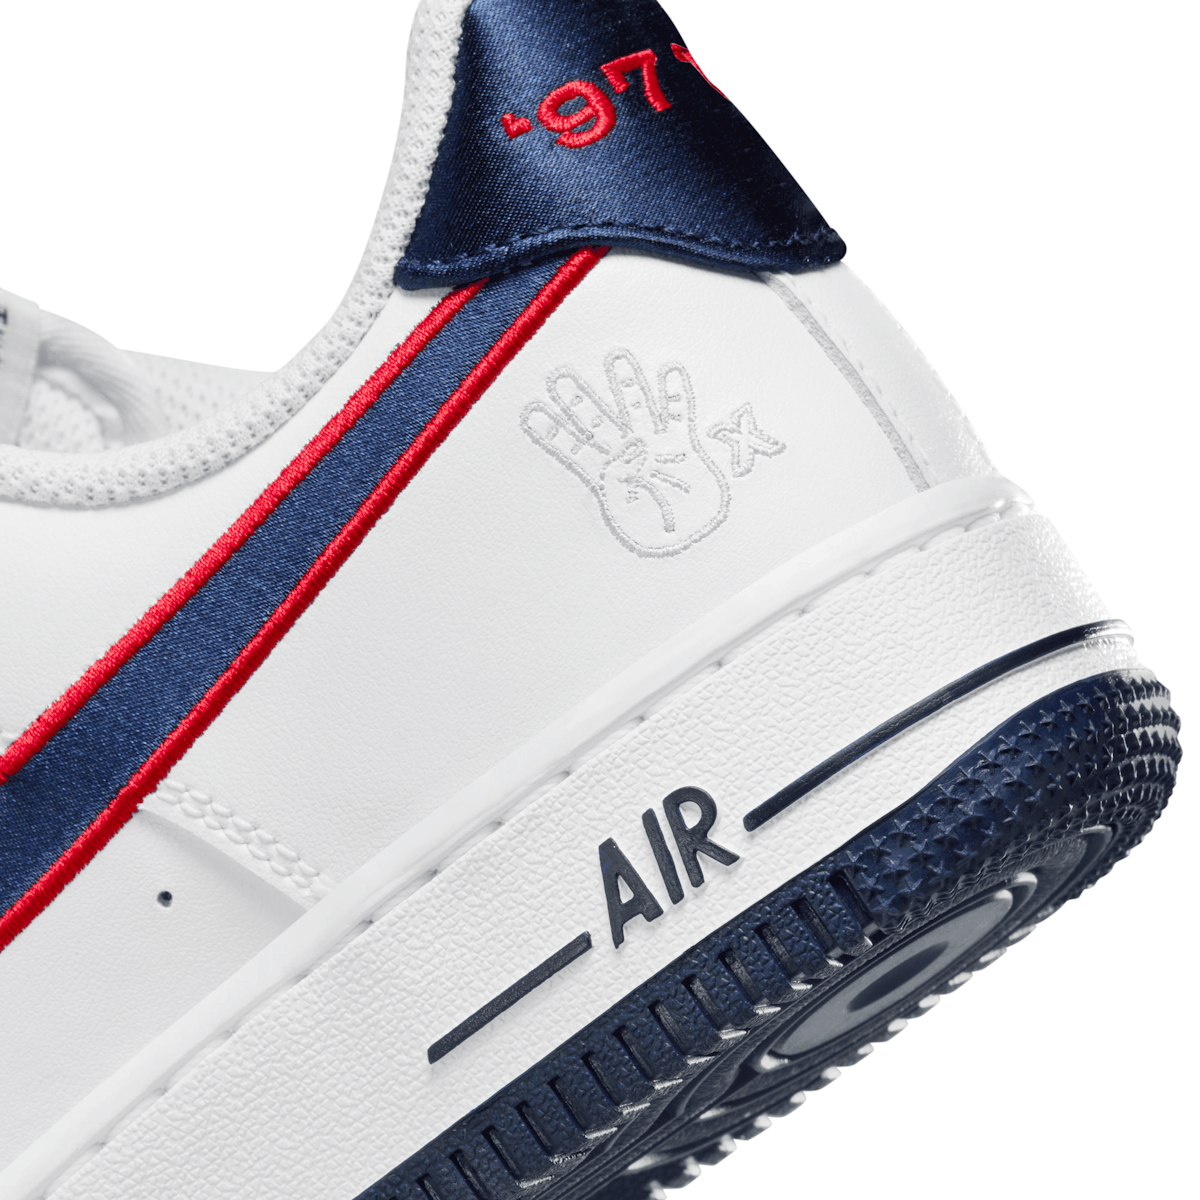 The Nike Air Force 1 Low Houston Comets 4-Peat Releases July 20